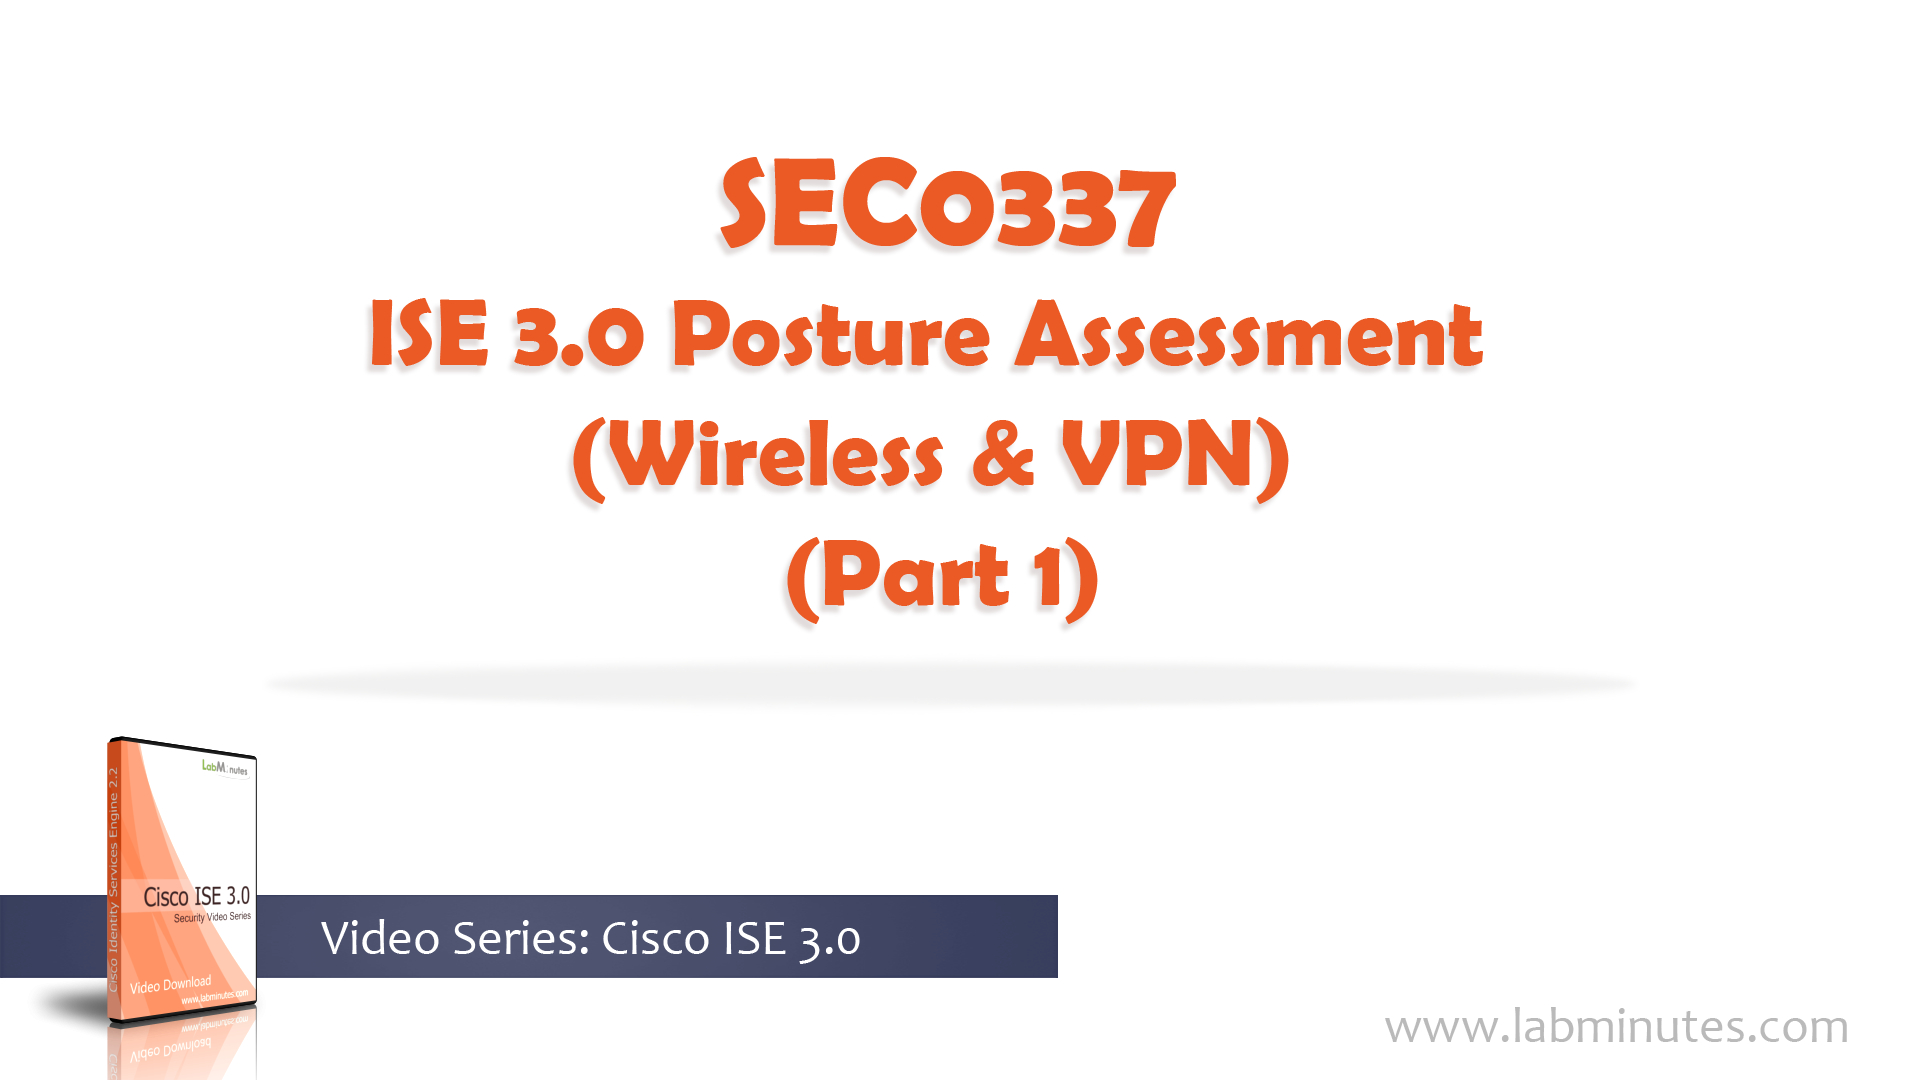 How to Configure ISE 3.0 Posture Assessment (Wireless and VPN) (Part 1)